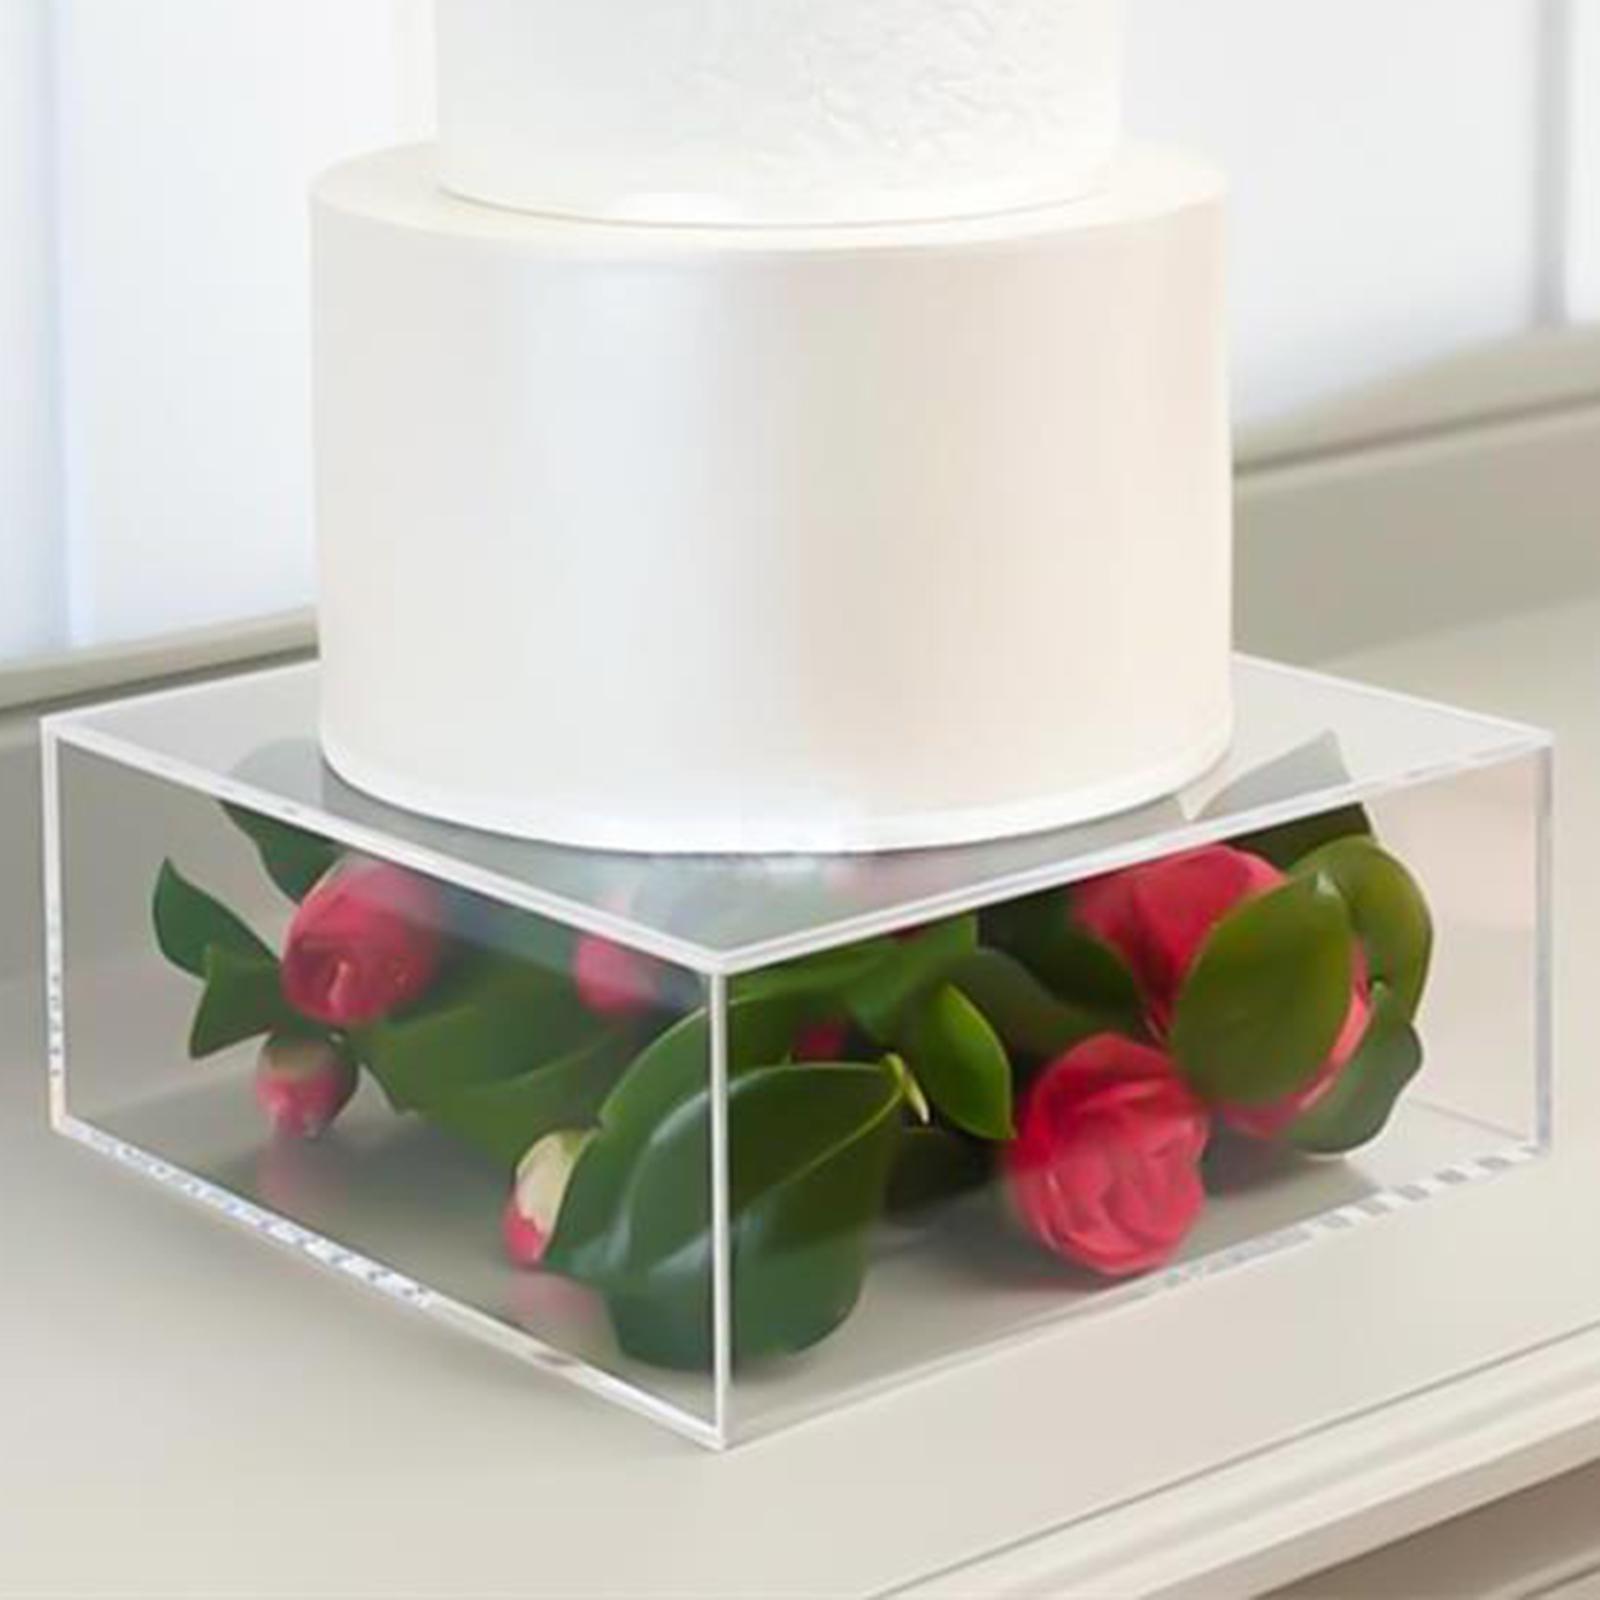 Cake Display Stand Square Acrylic Cake Stand for Party Favors Gifts Birthday